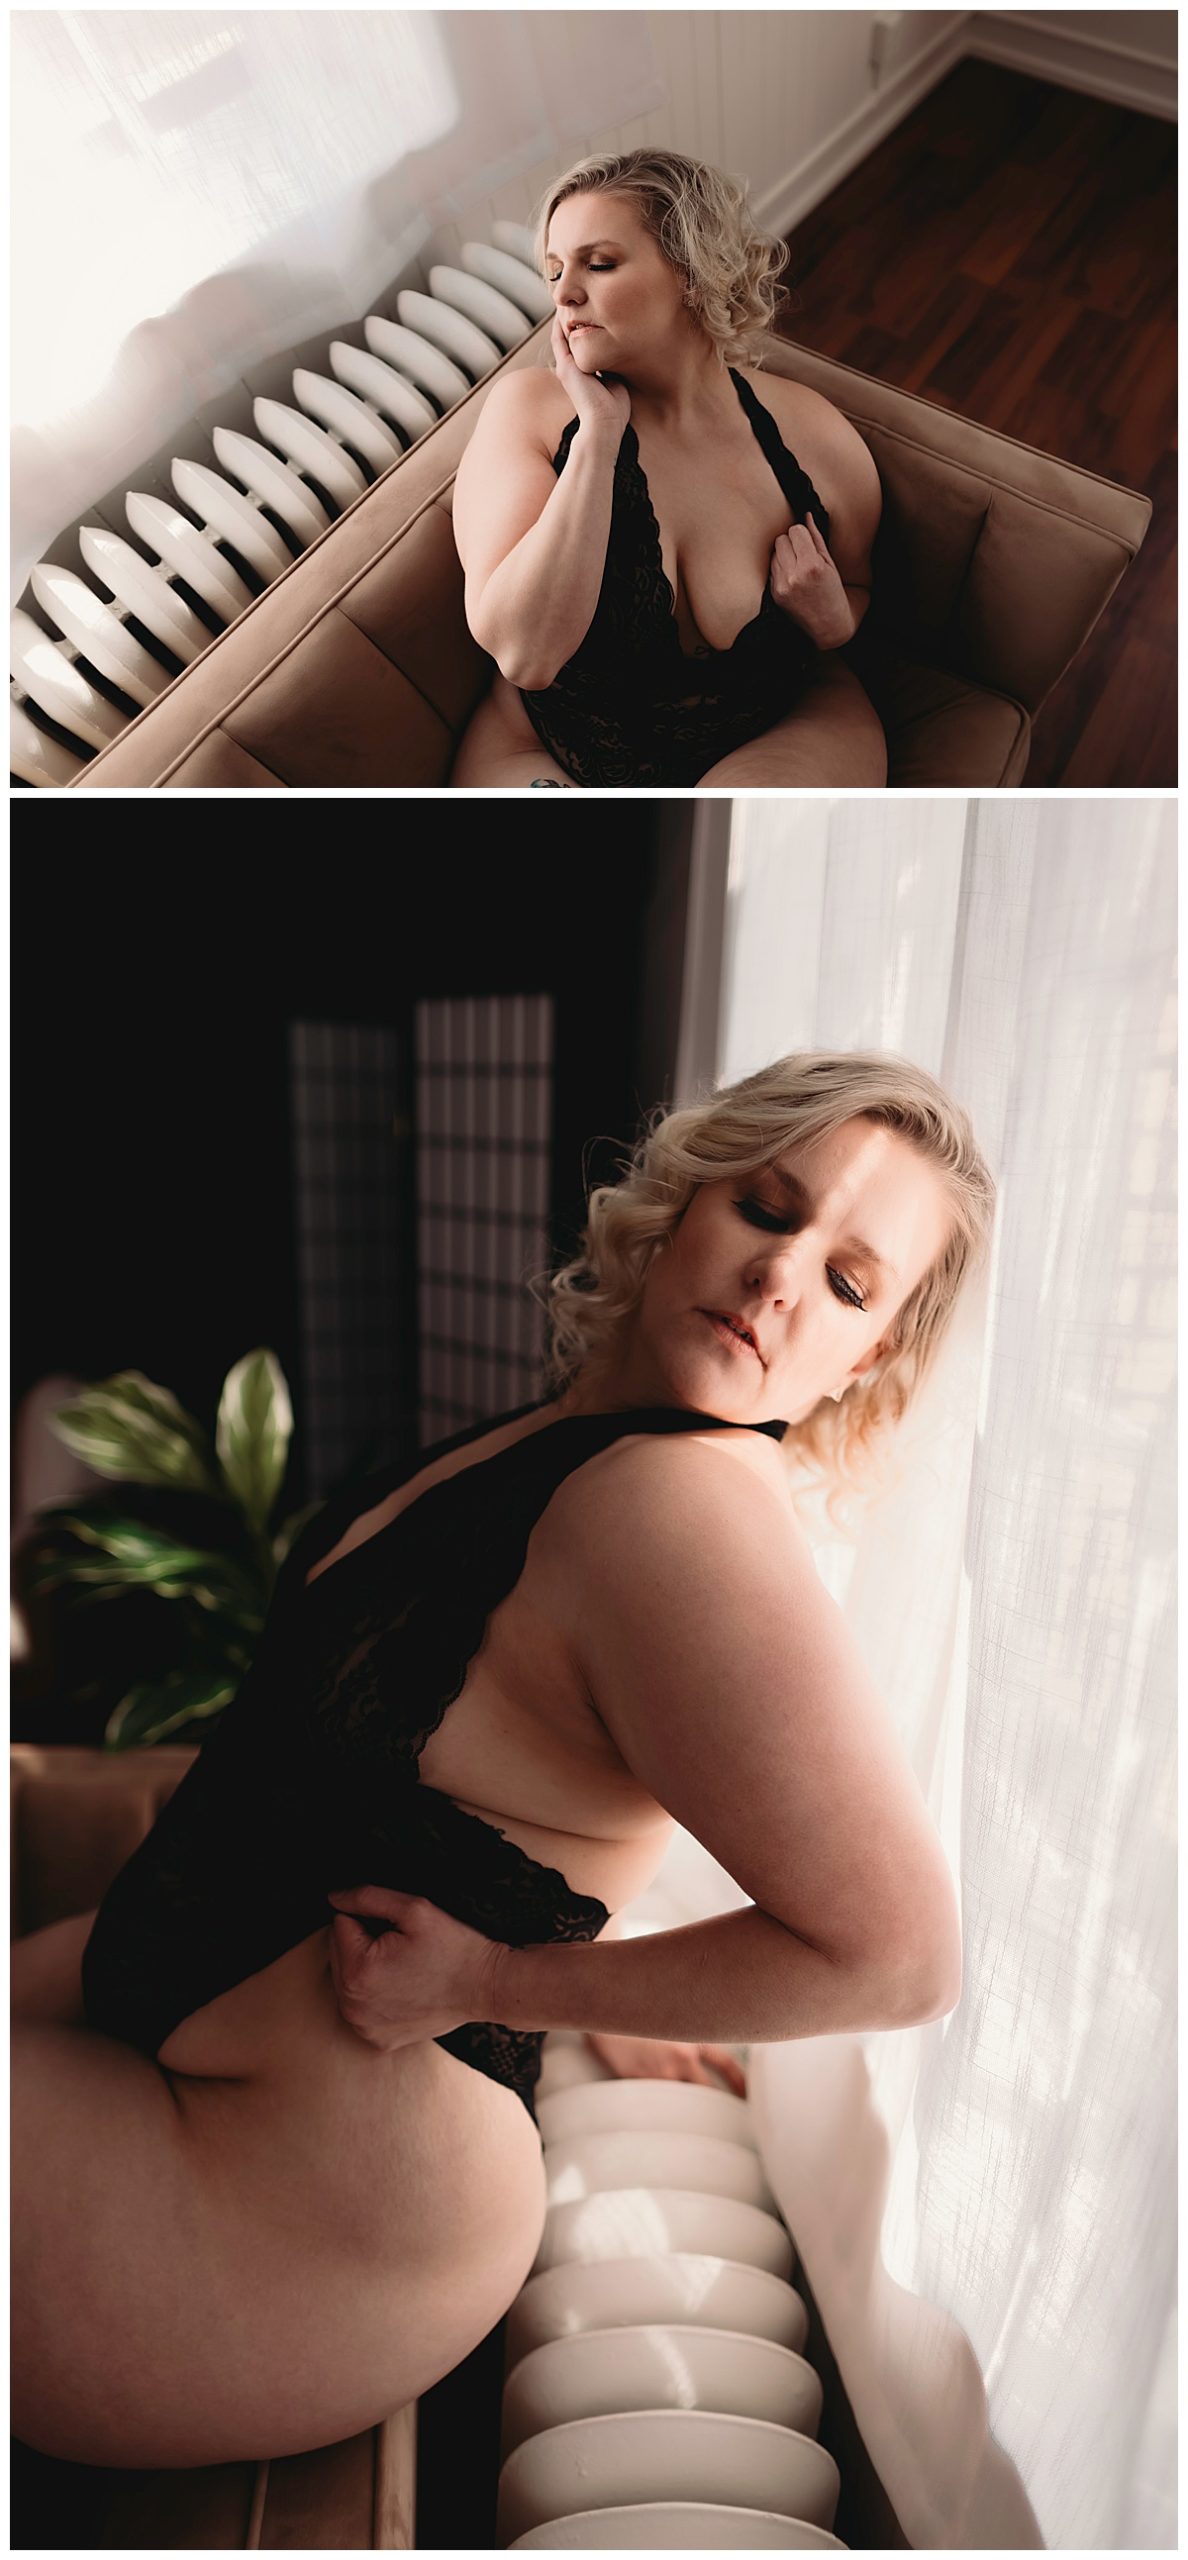 Blonde embraces self in black lingerie because you are More Than Your Size